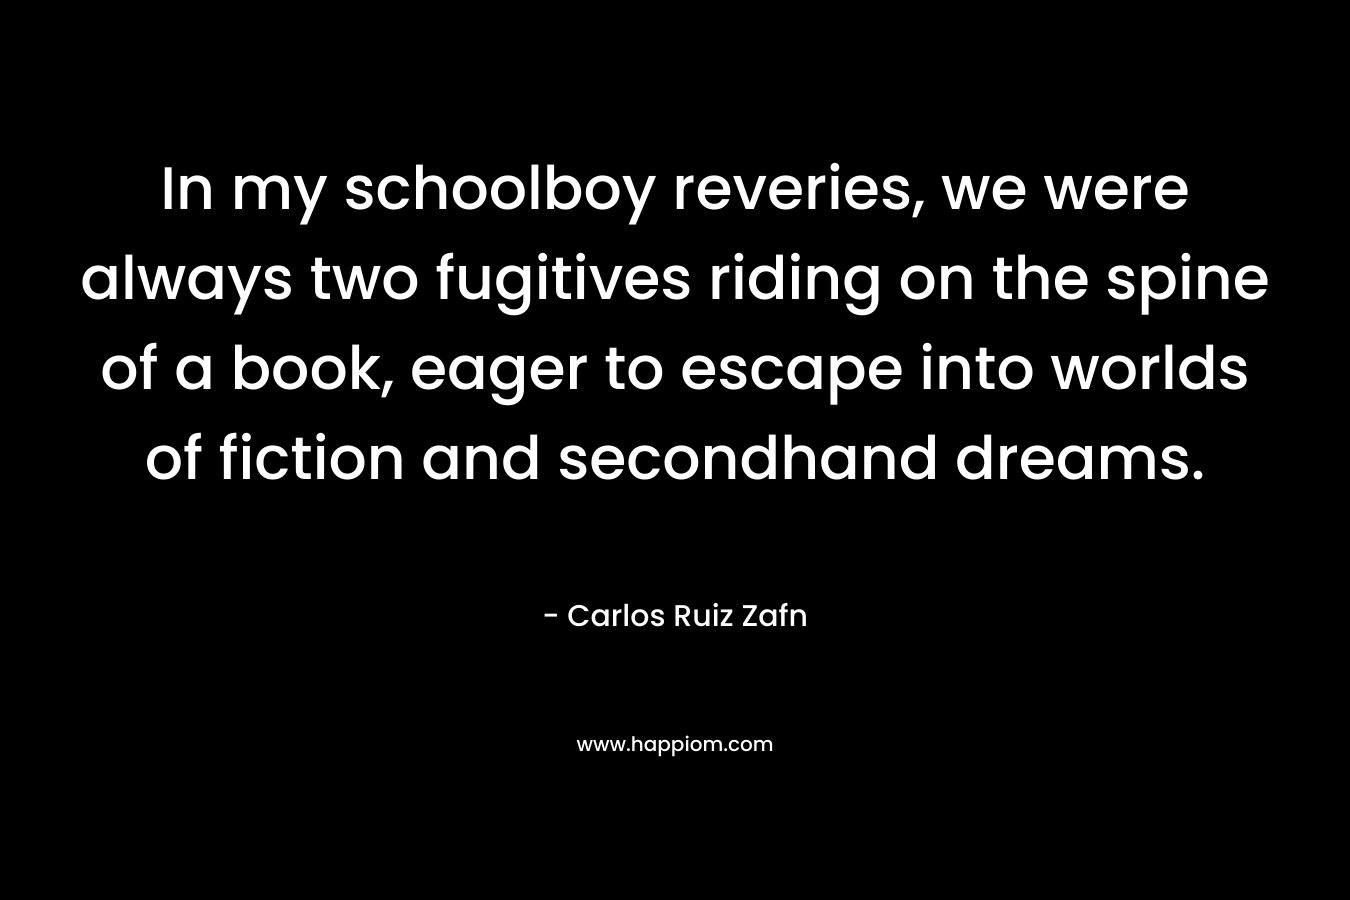 In my schoolboy reveries, we were always two fugitives riding on the spine of a book, eager to escape into worlds of fiction and secondhand dreams. – Carlos Ruiz Zafn